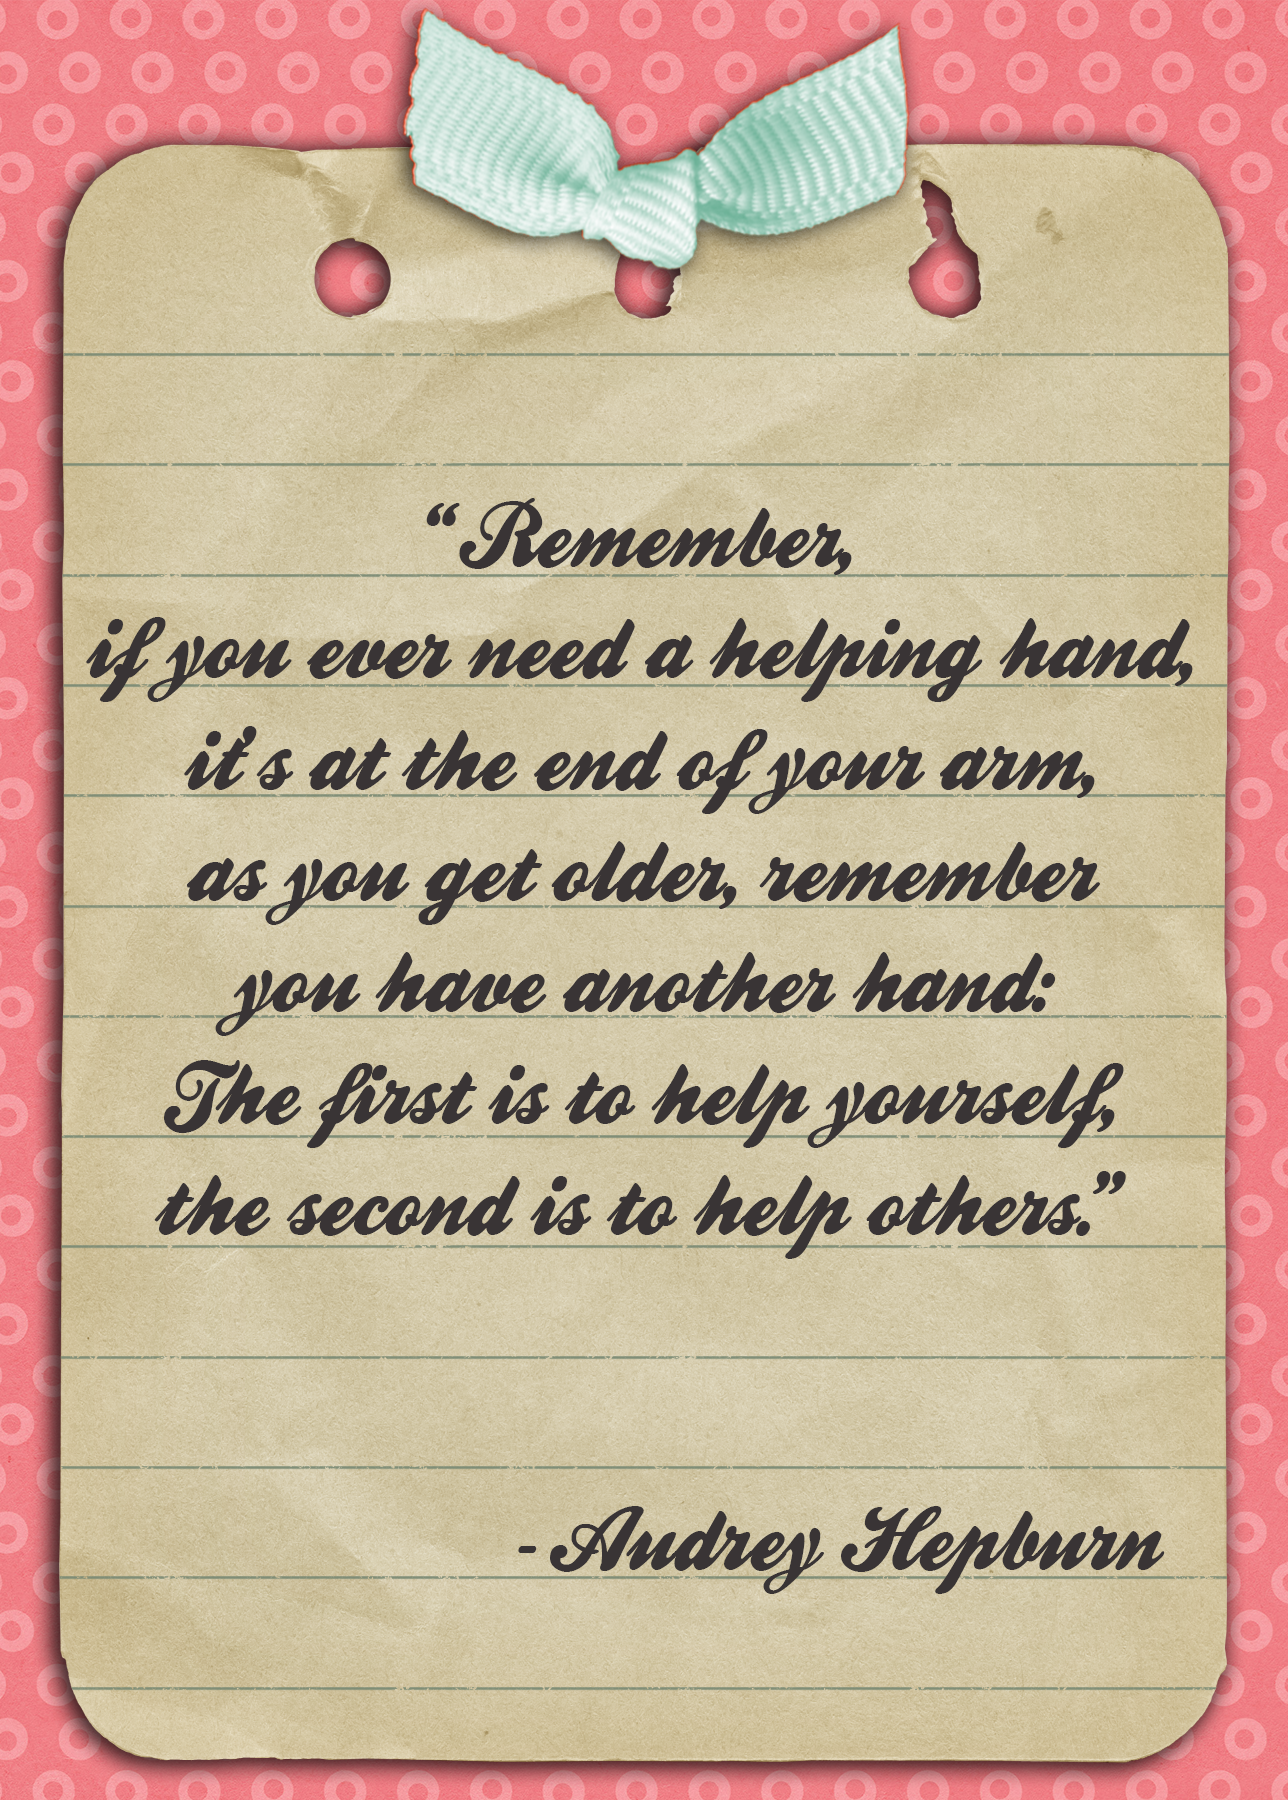 Quotes About Helping Others. QuotesGram1288 x 1800